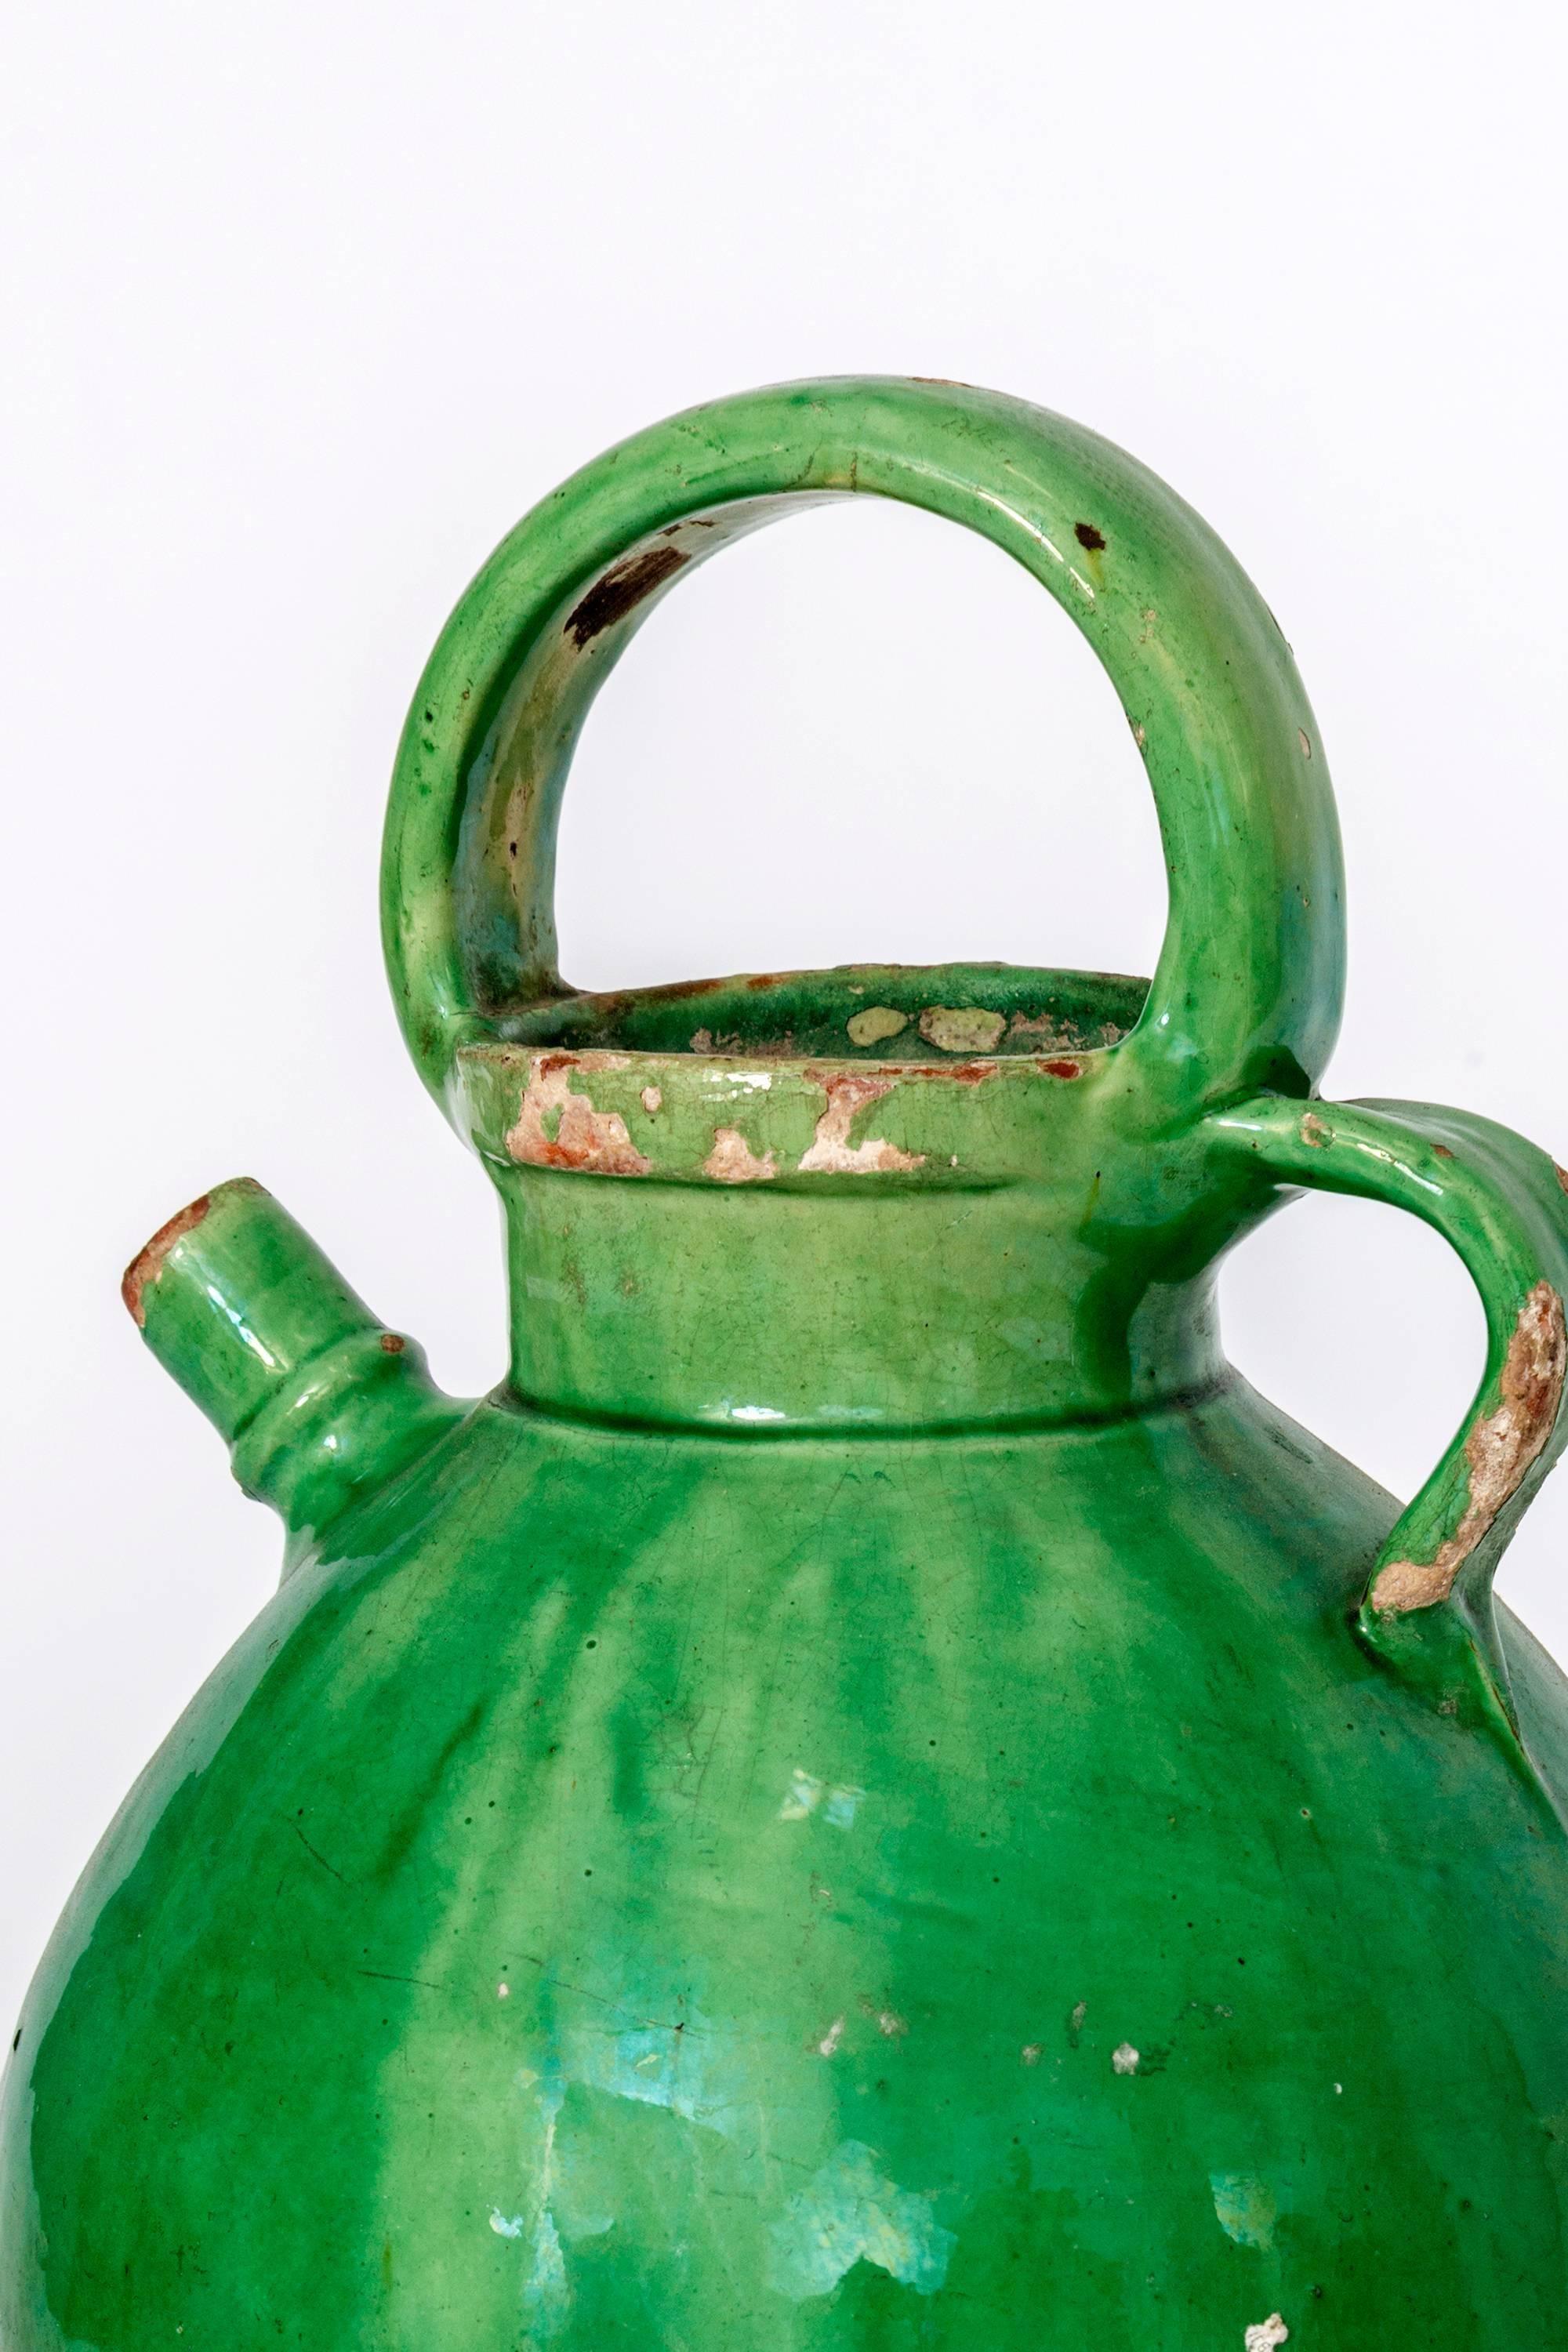 Large green glazed French crockery oil vessel with handles.